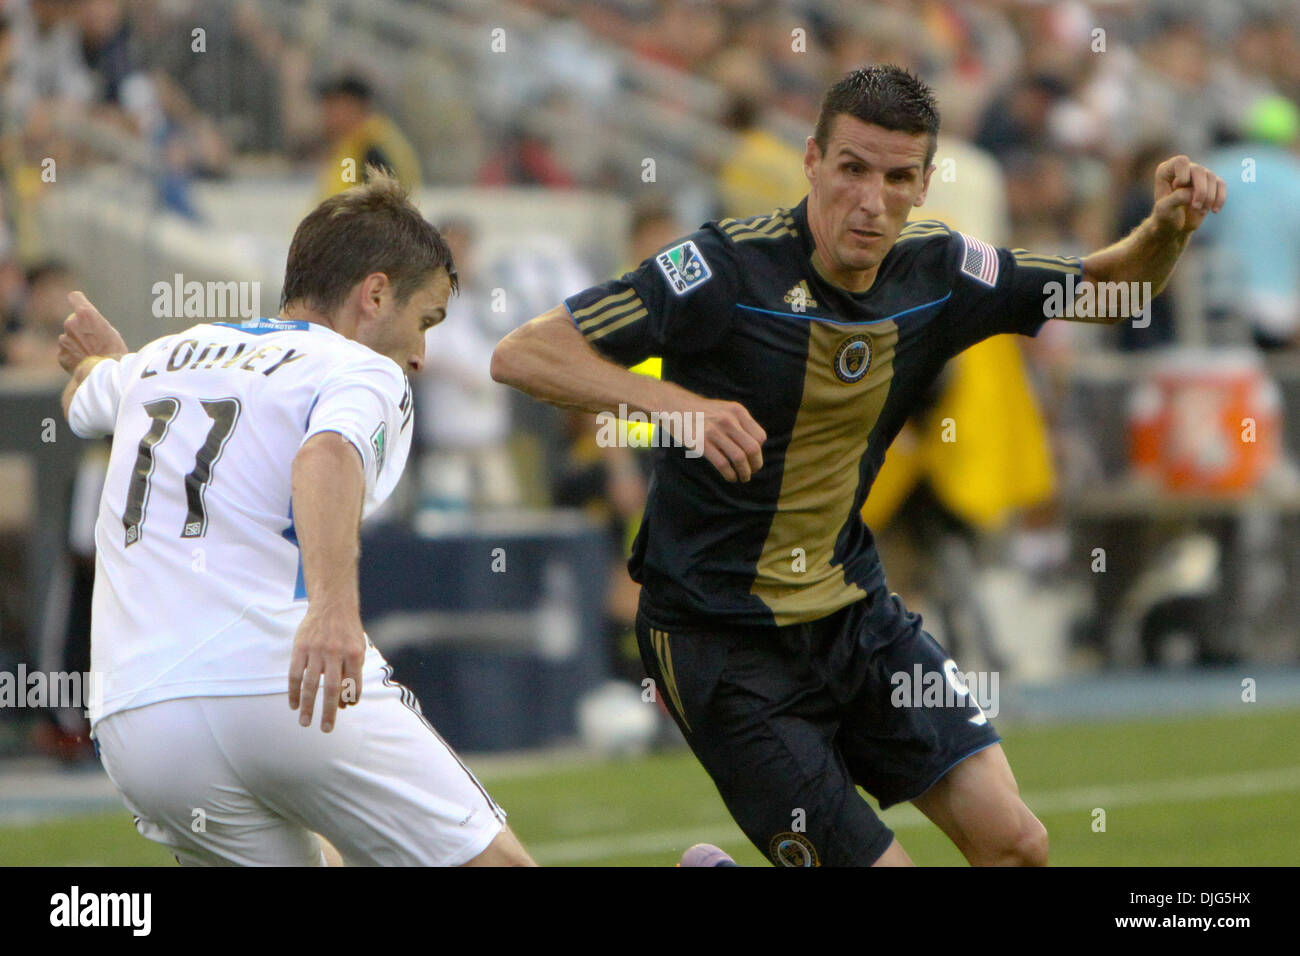 Philadelphia Union midfielder Sebastien Le Toux (#9) and San Jose Earthquakes midfielder Bobby Convey (#11) fight for the ball during the match at PPL Park in Chester, PA. The Union lost 2-1. (Credit Image: © Kate McGovern/Southcreek Global/ZUMApress.com) Stock Photo